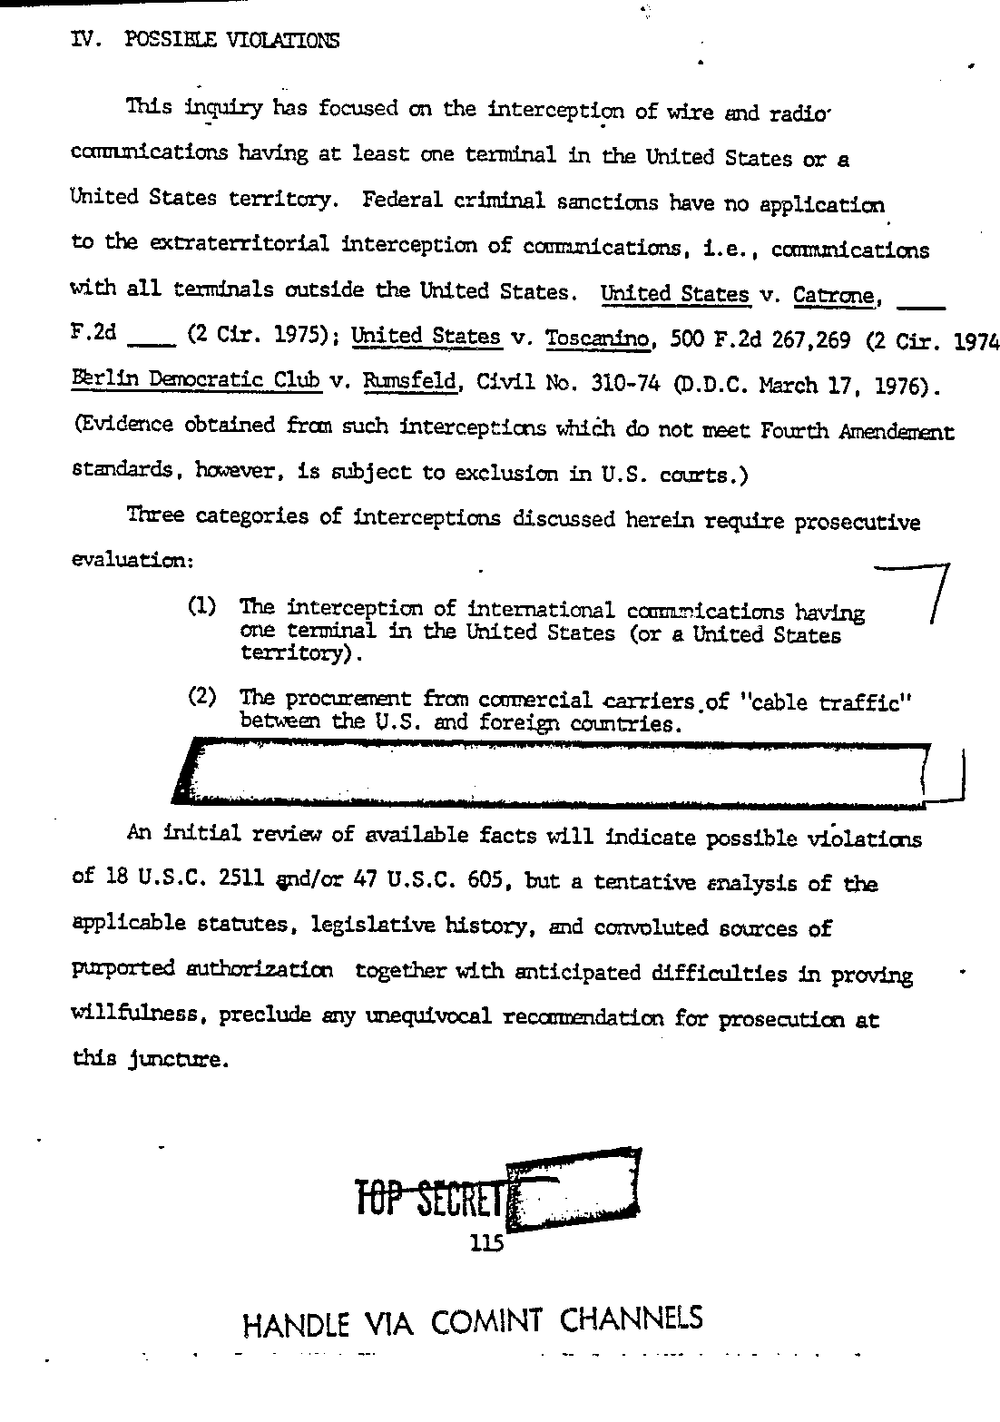 Page 123 from Report on Inquiry Into CIA Related Electronic Surveillance Activities